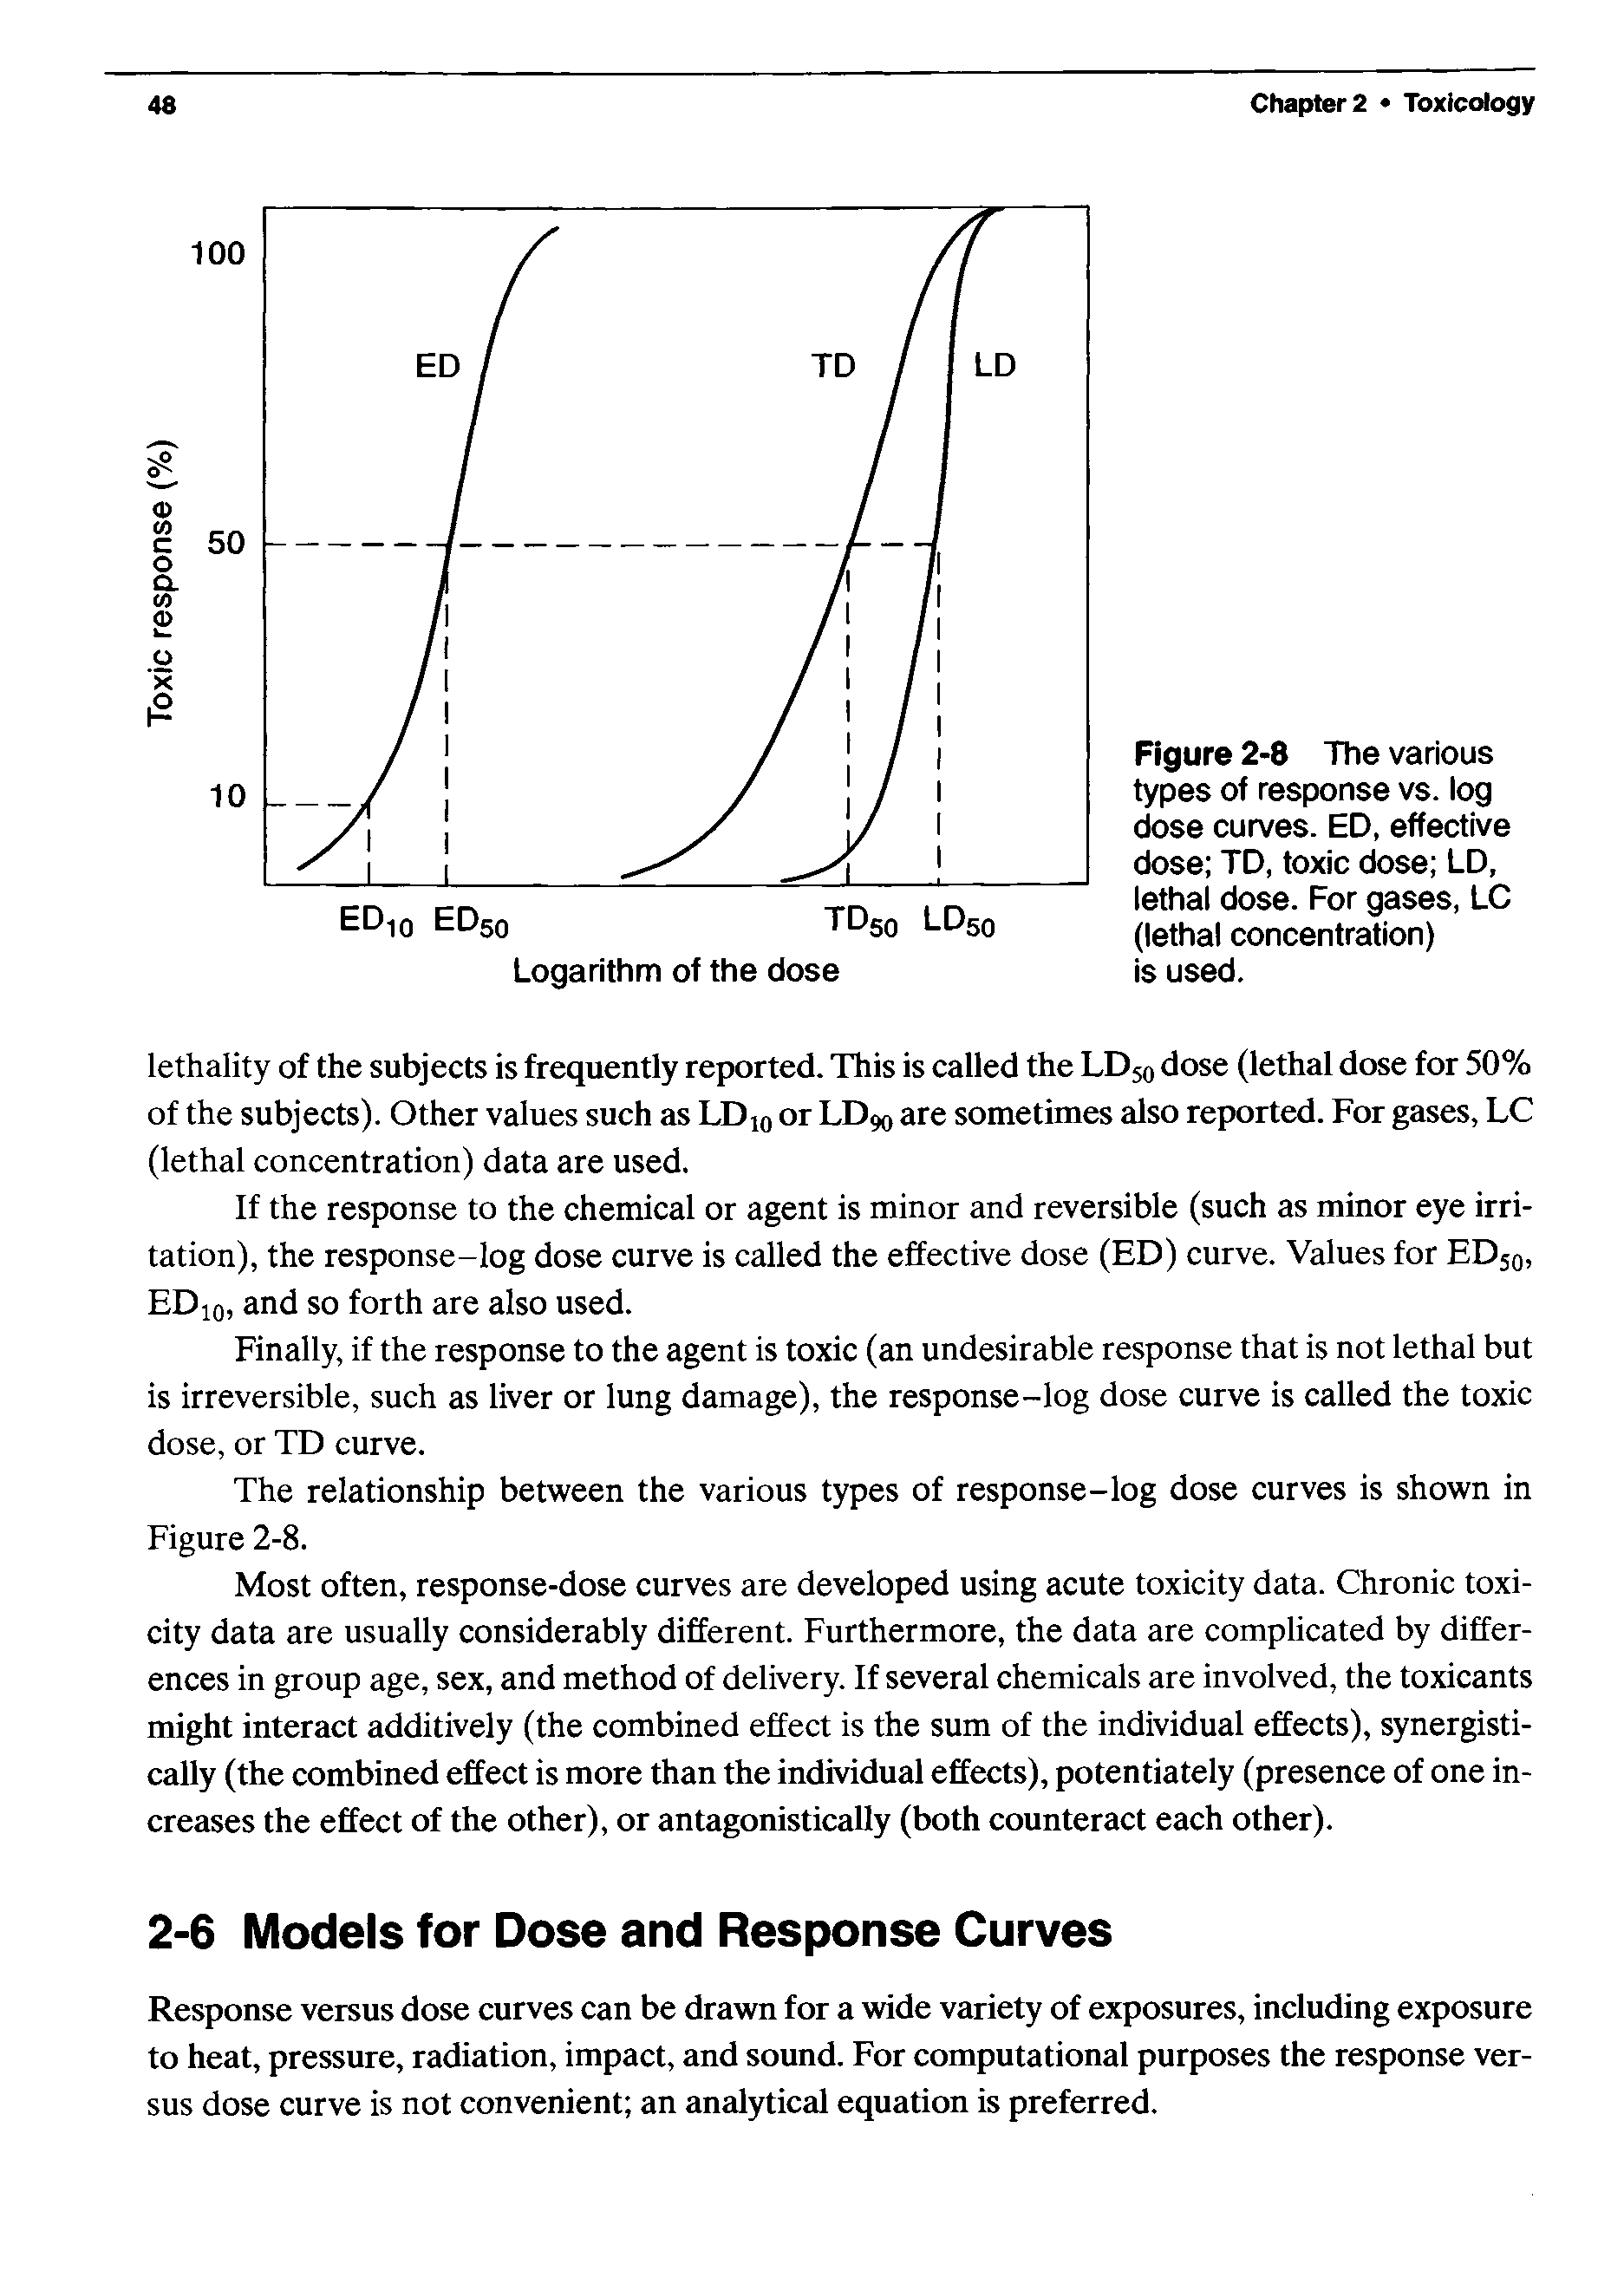 Figure 2-8 The various types of response vs. log dose curves. ED, effective dose TD, toxic dose LD, lethal dose. For gases, LC (lethal concentration) is used.